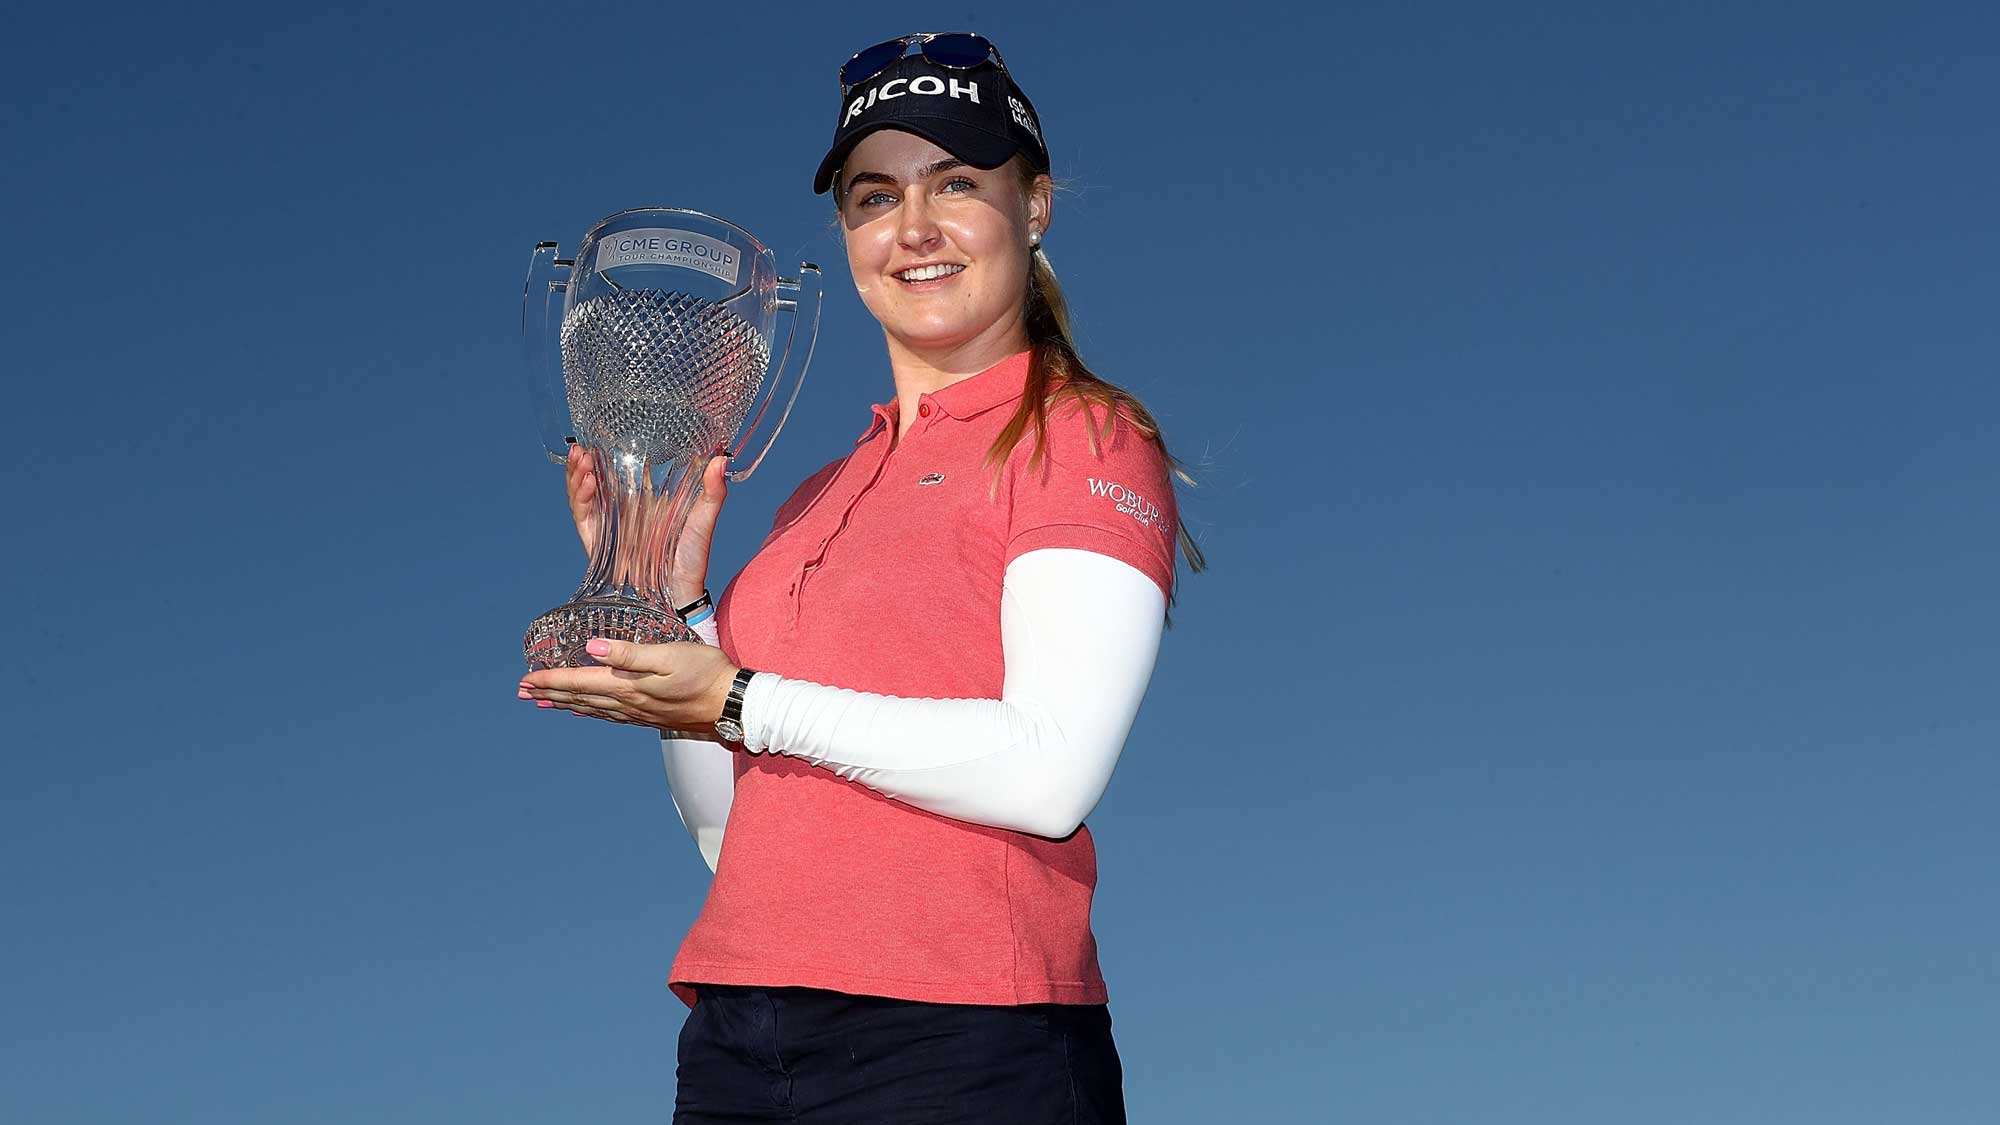 Charley Hull of England poses with the CME Tour Championship trophy during the final round of the CME Group Tour Championship at Tiburon Golf Club